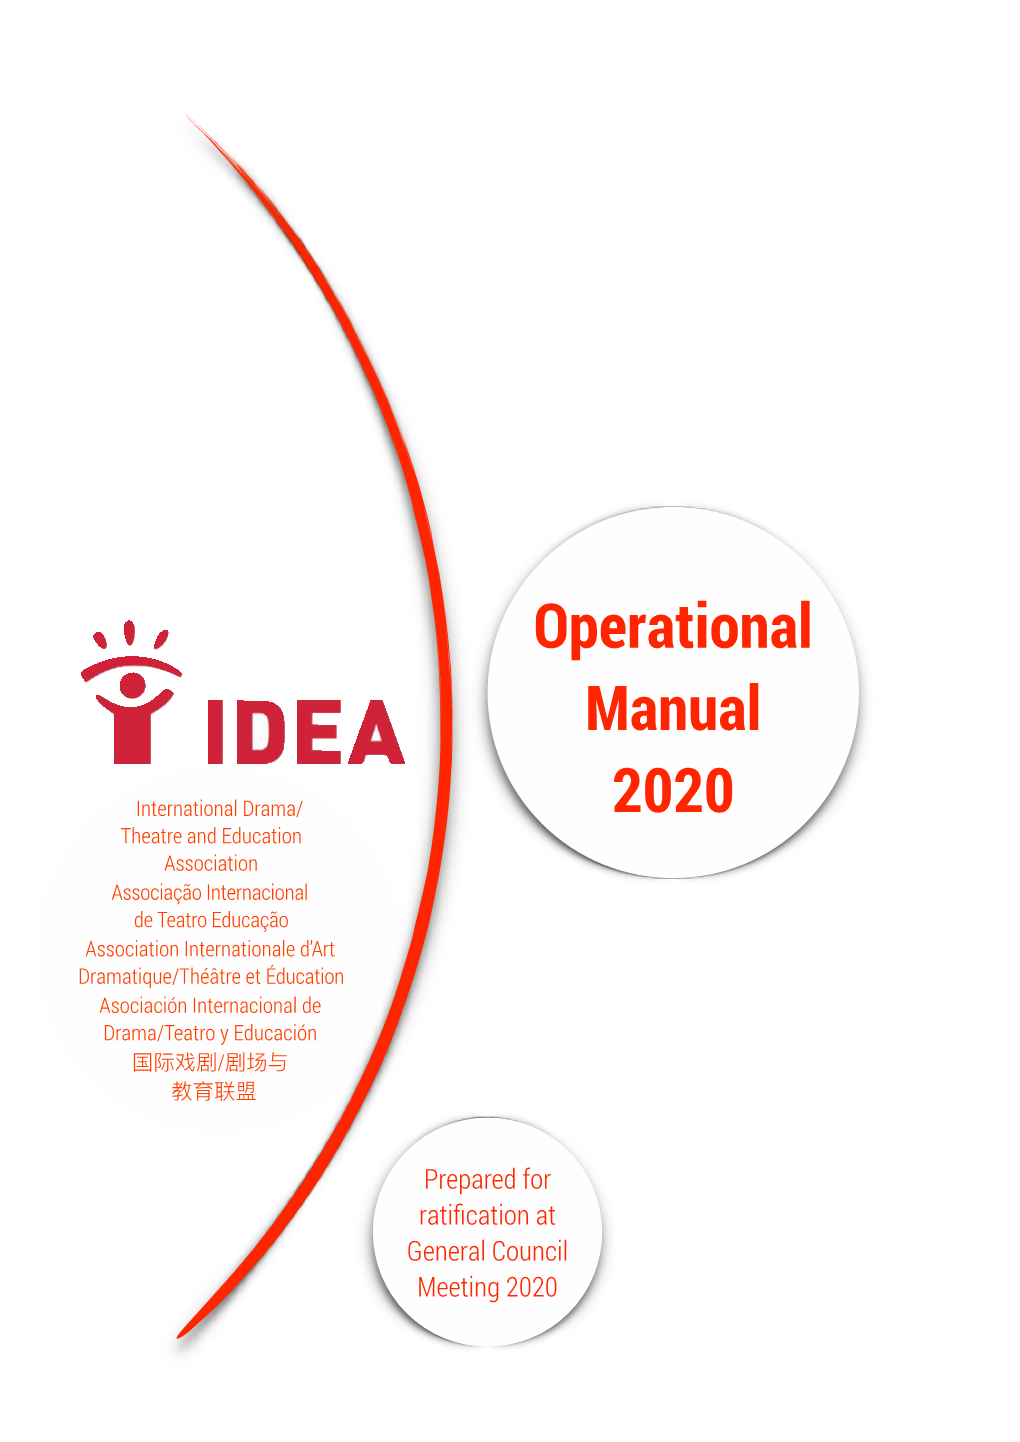 IDEA Operational Manual Revised September 2020 CONSOLIDATED with Appendices